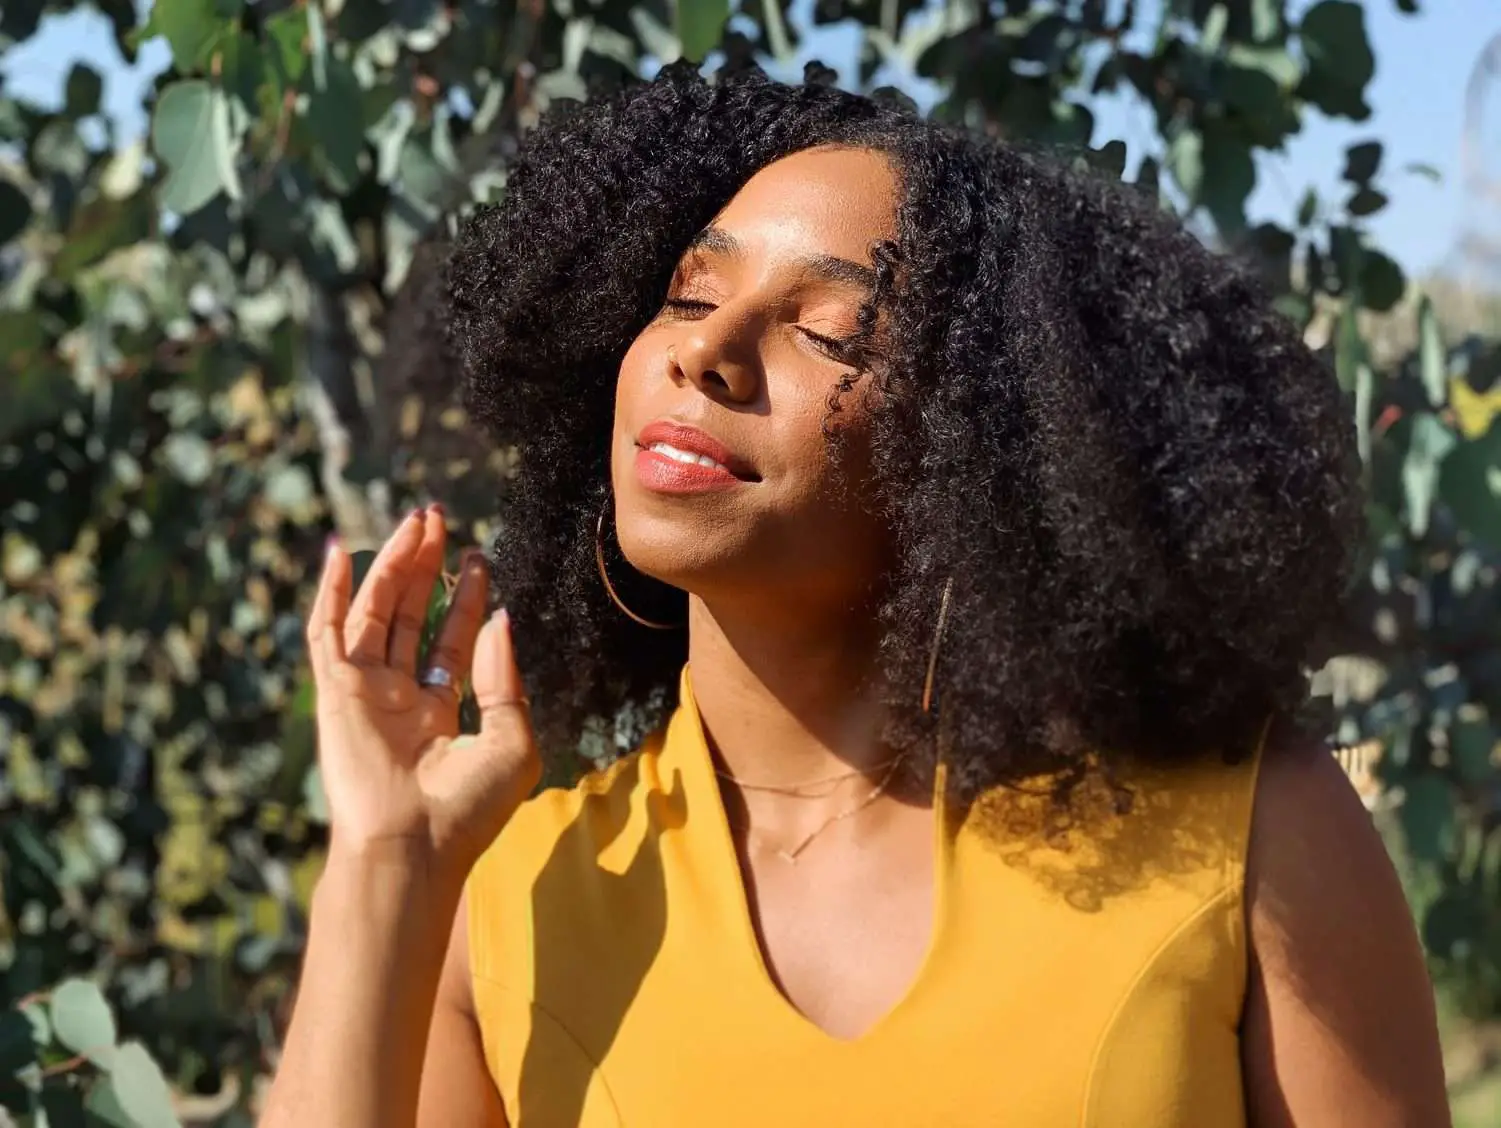 Beautiful Black women taking in the sunshine, wearing yellow with natural hair and eyes closed